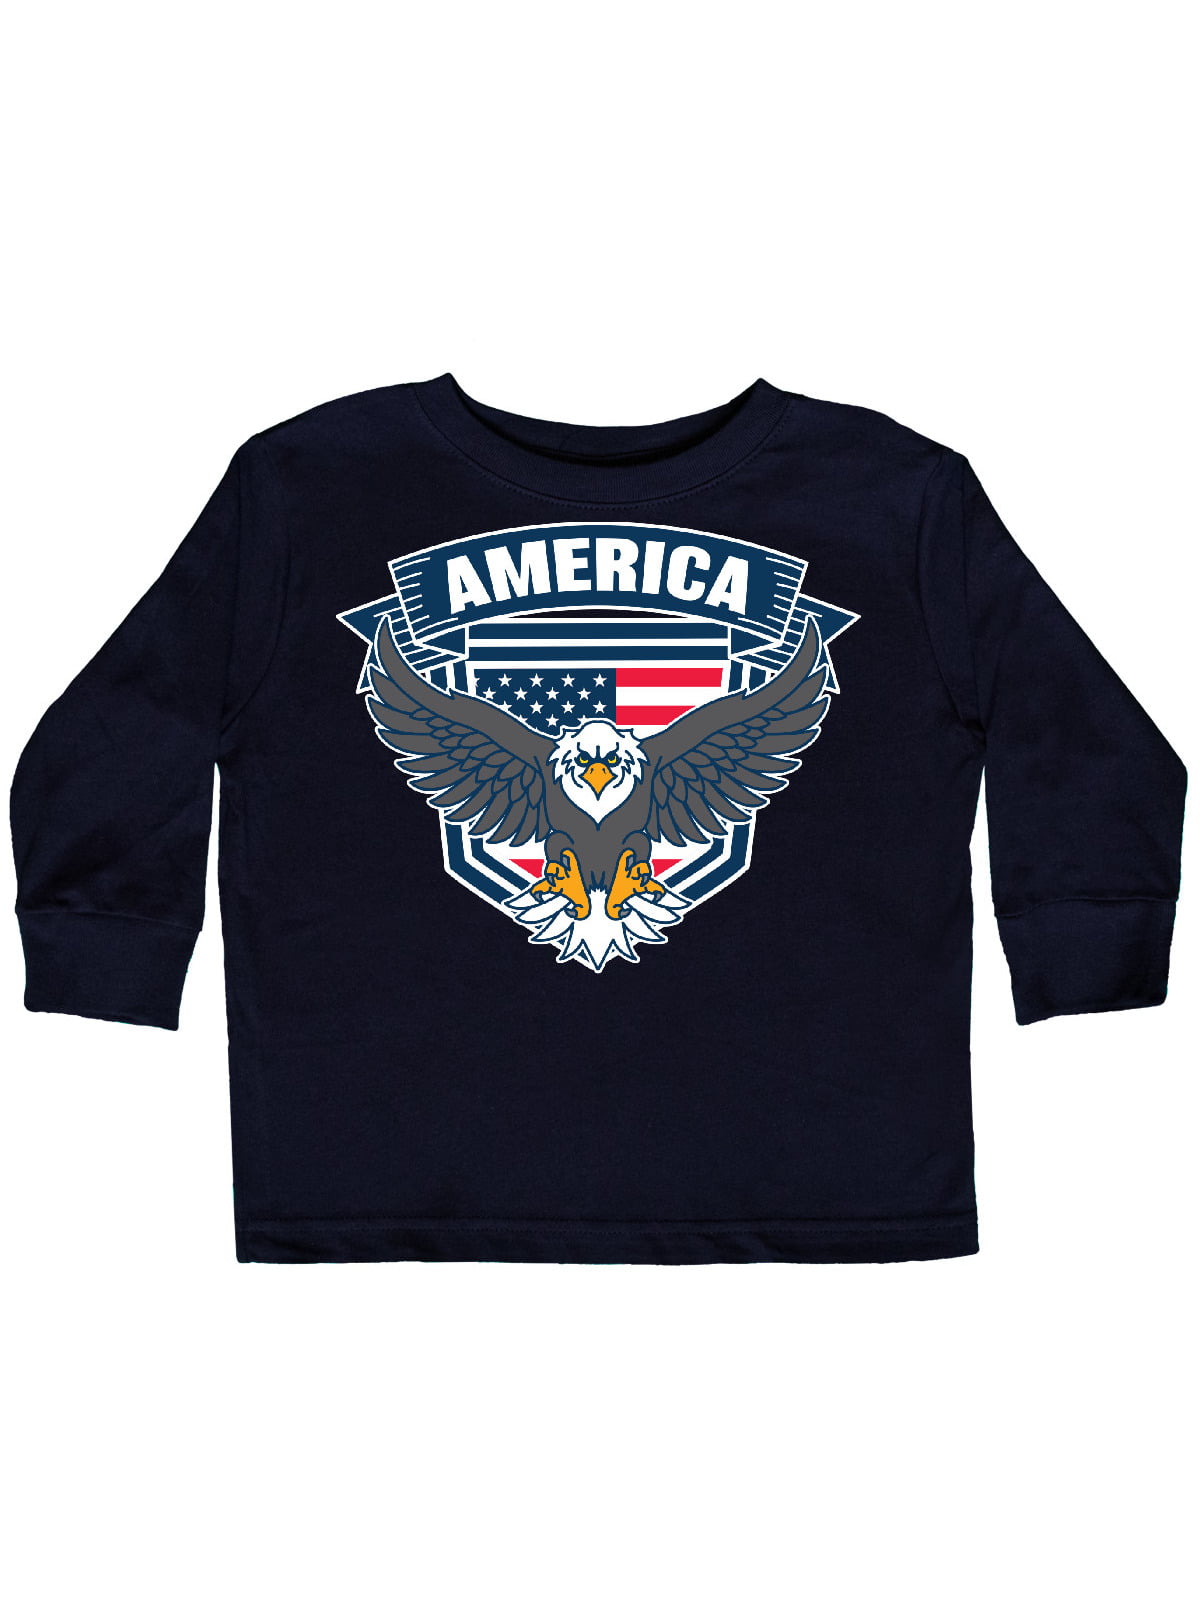 inktastic America with Eagle Shield and Banner Toddler T-Shirt 